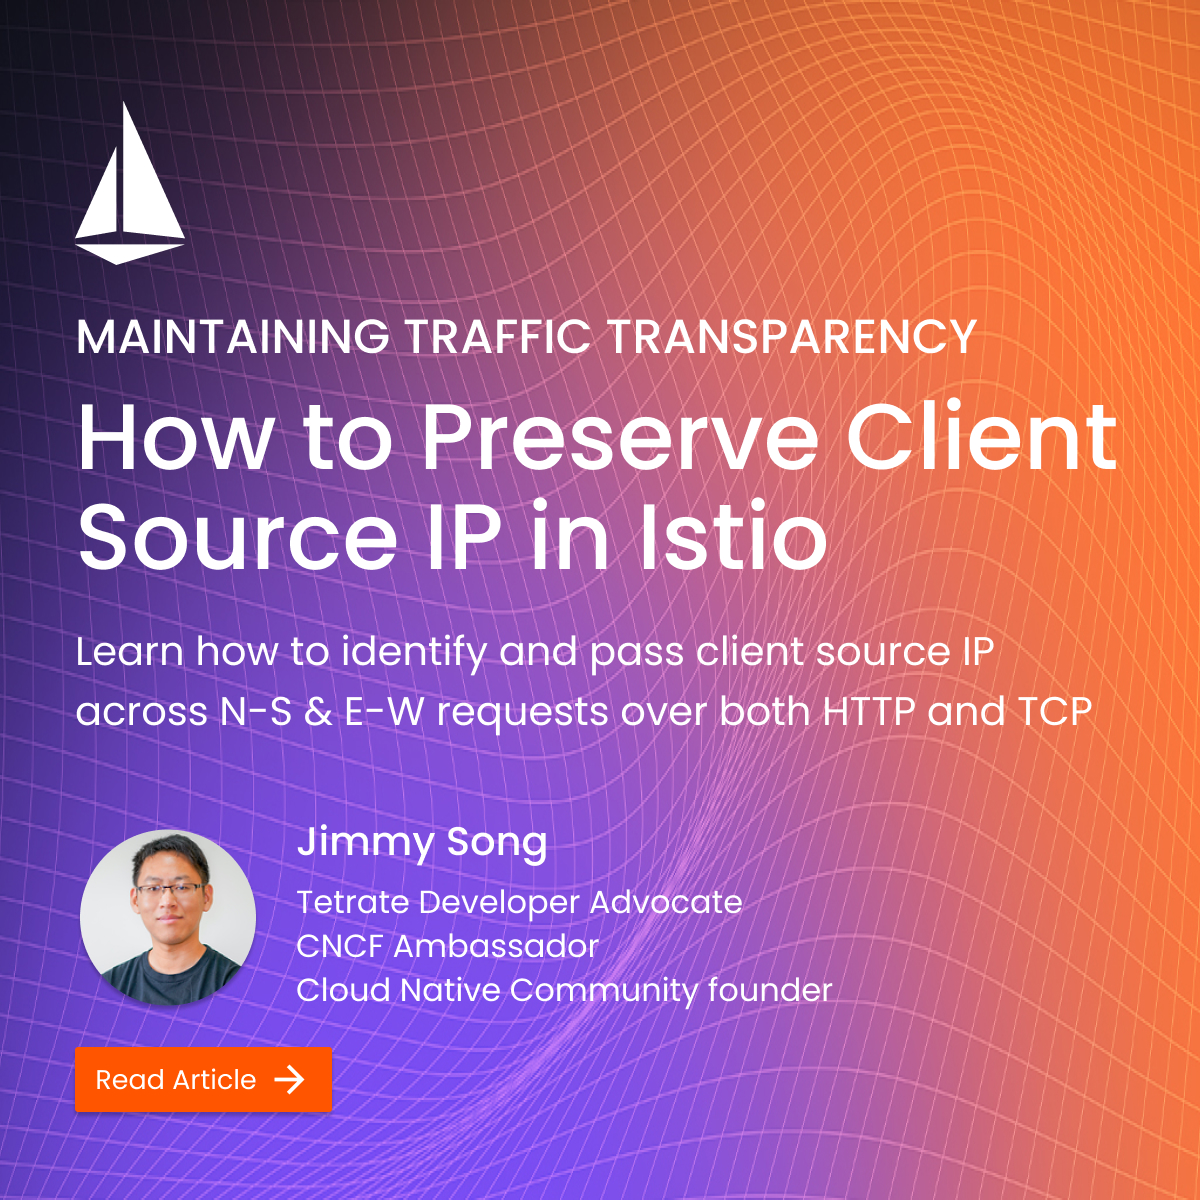 Preserving the client source IP in upstream requests is crucial for context-dependent functions like access control, load balancing, and data analysis. Read the latest from @jimmysongio on how Istio makes this possible: tetr8.io/49tQHQ1 #istio #servicemesh #cloudnative